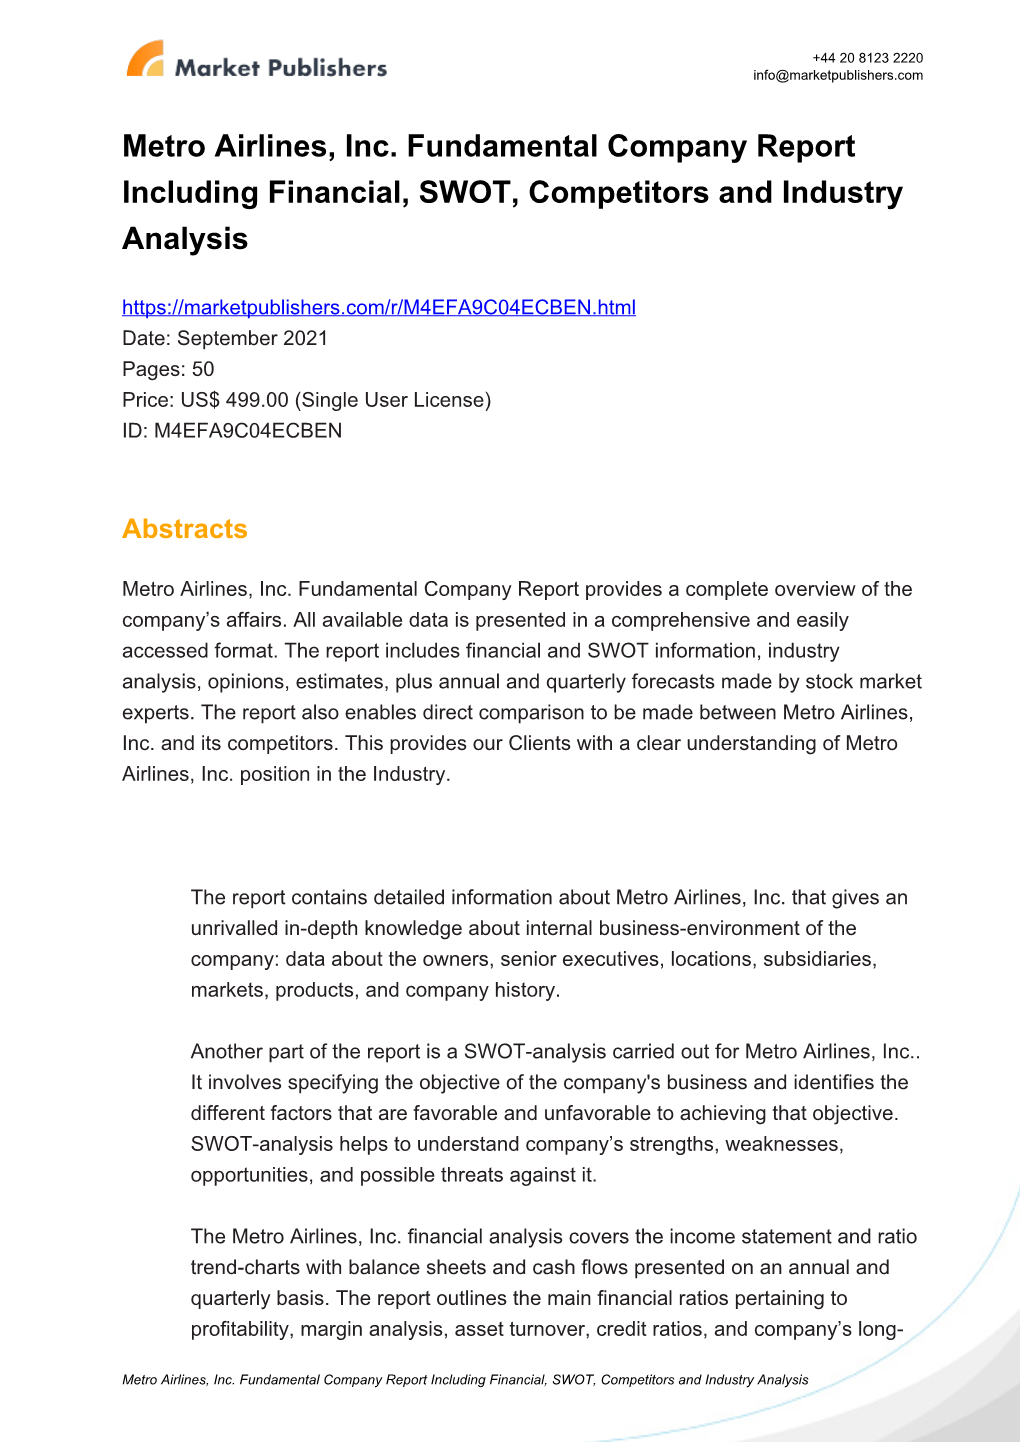 Metro Airlines, Inc. Fundamental Company Report Including Financial, SWOT, Competitors and Industry Analysis